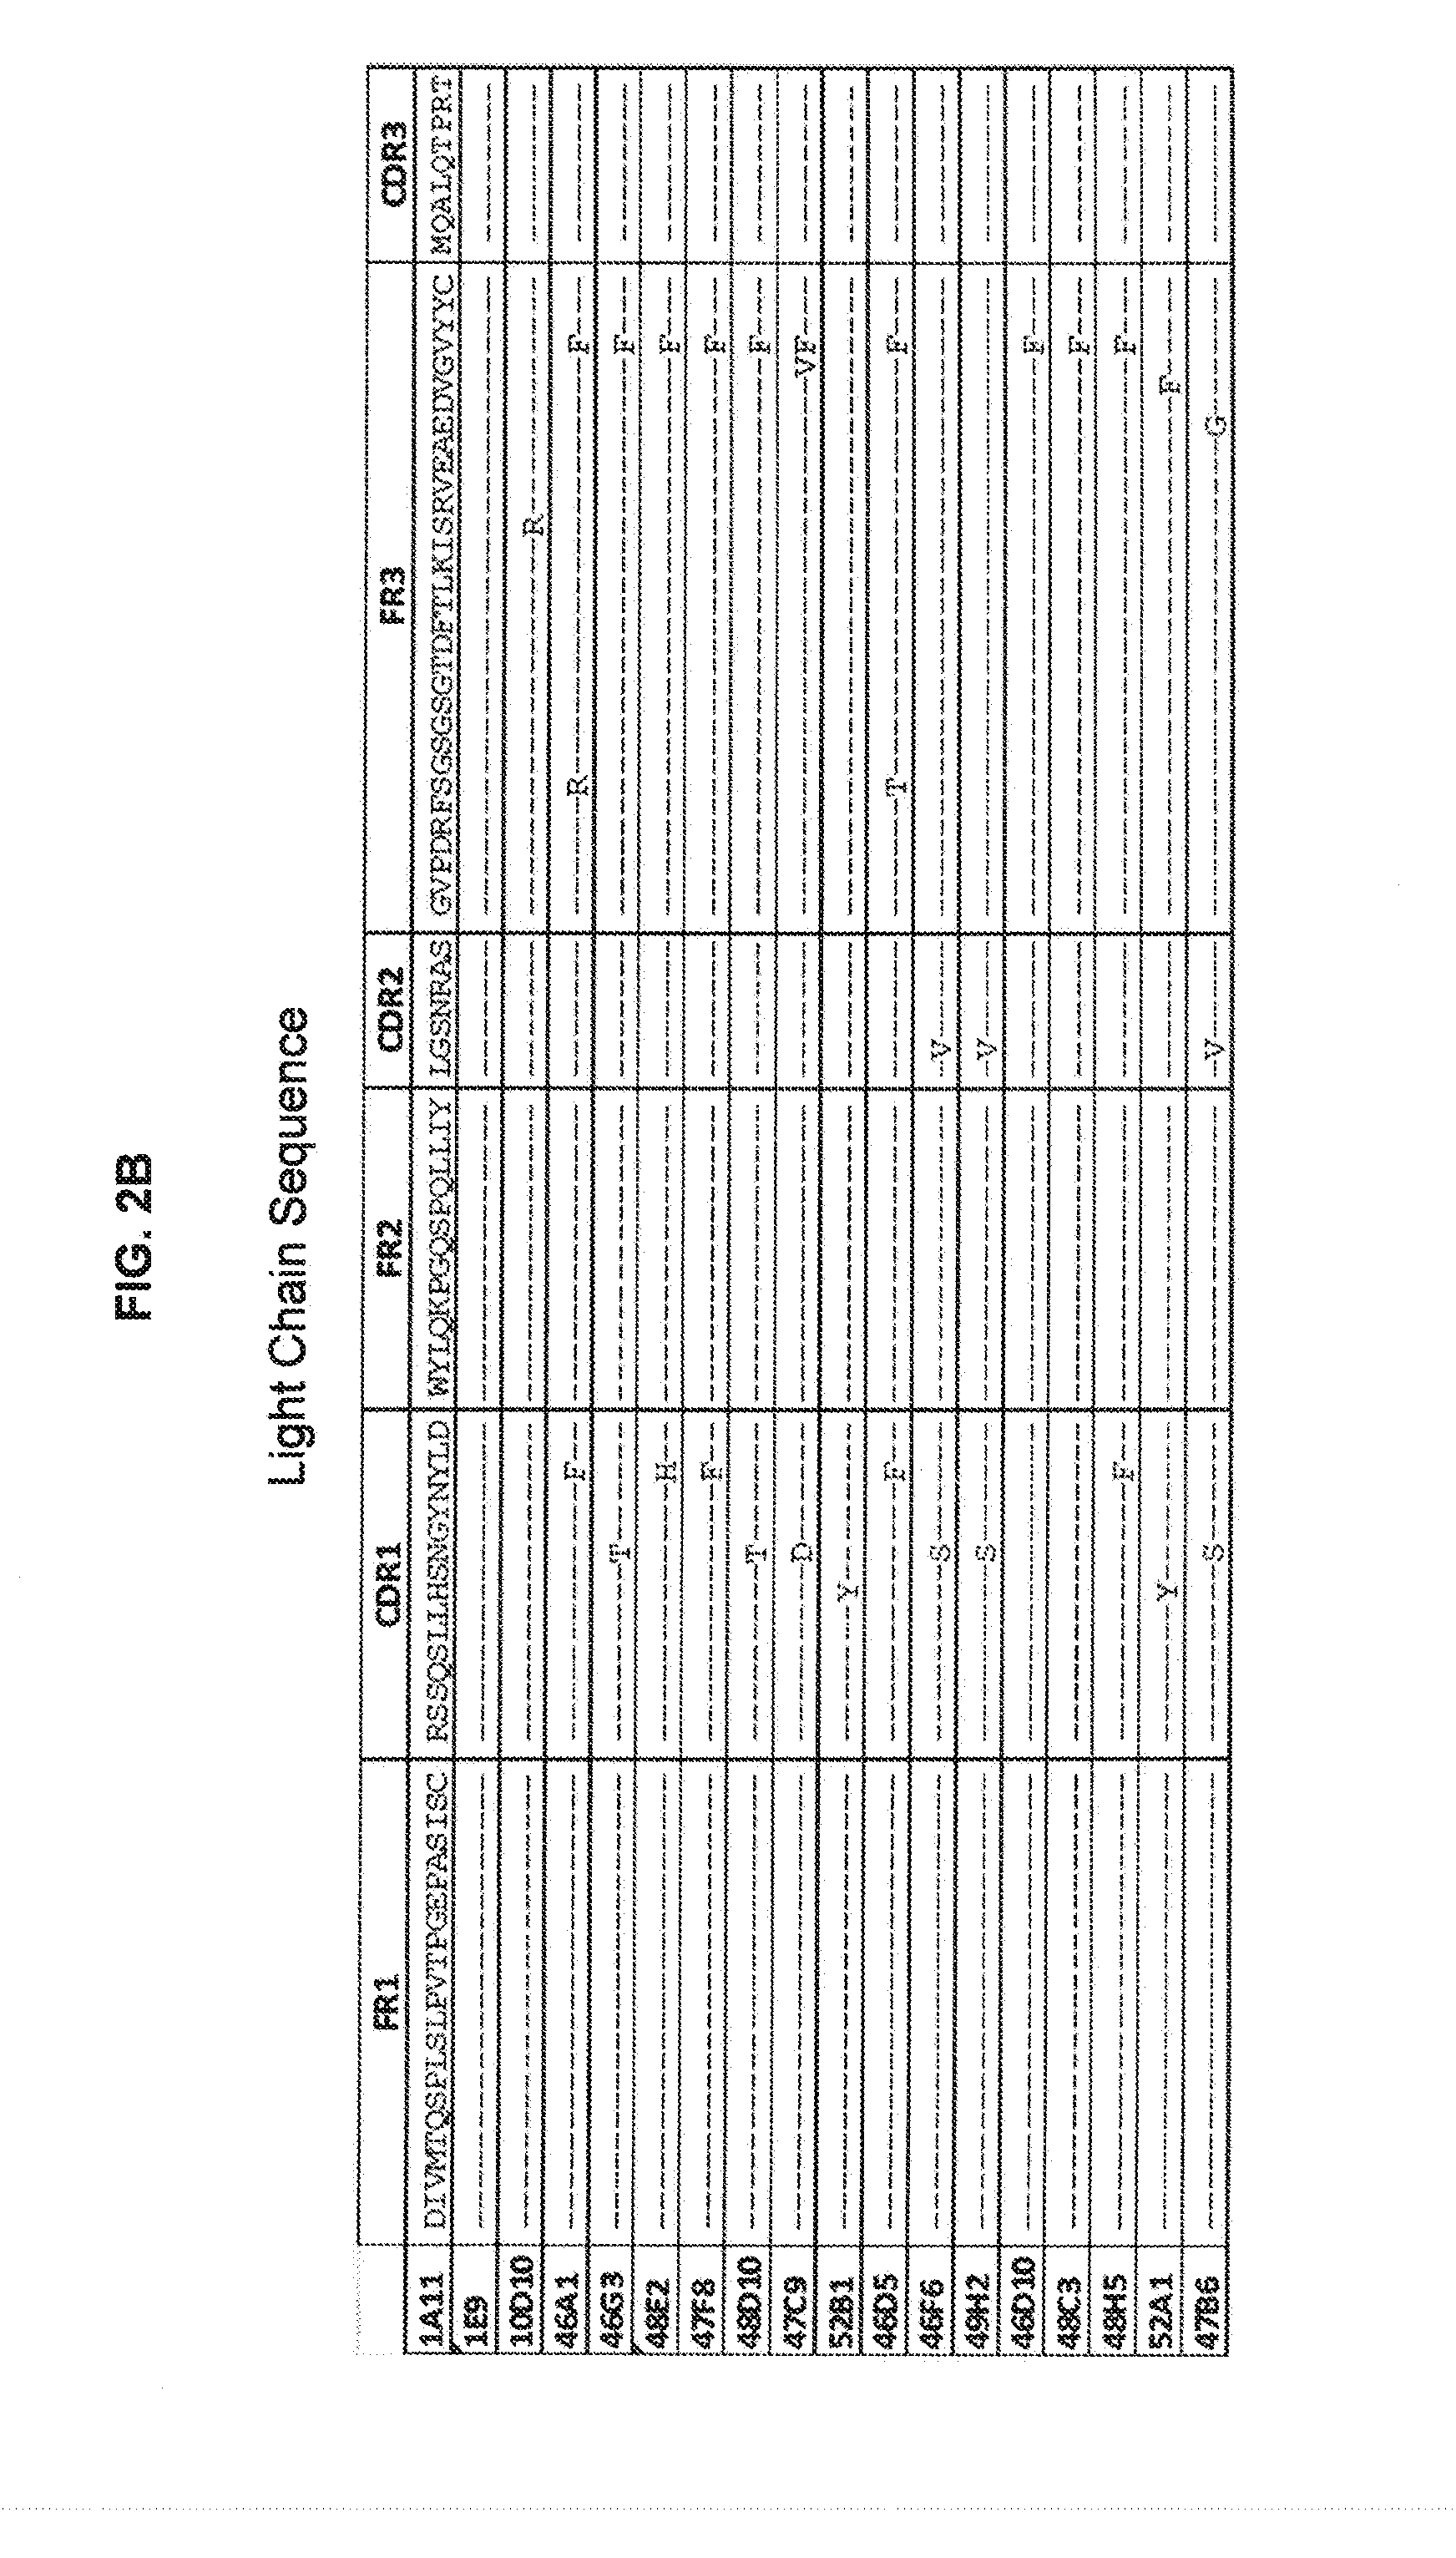 Cb-1 receptor antigen-binding proteins and uses thereof